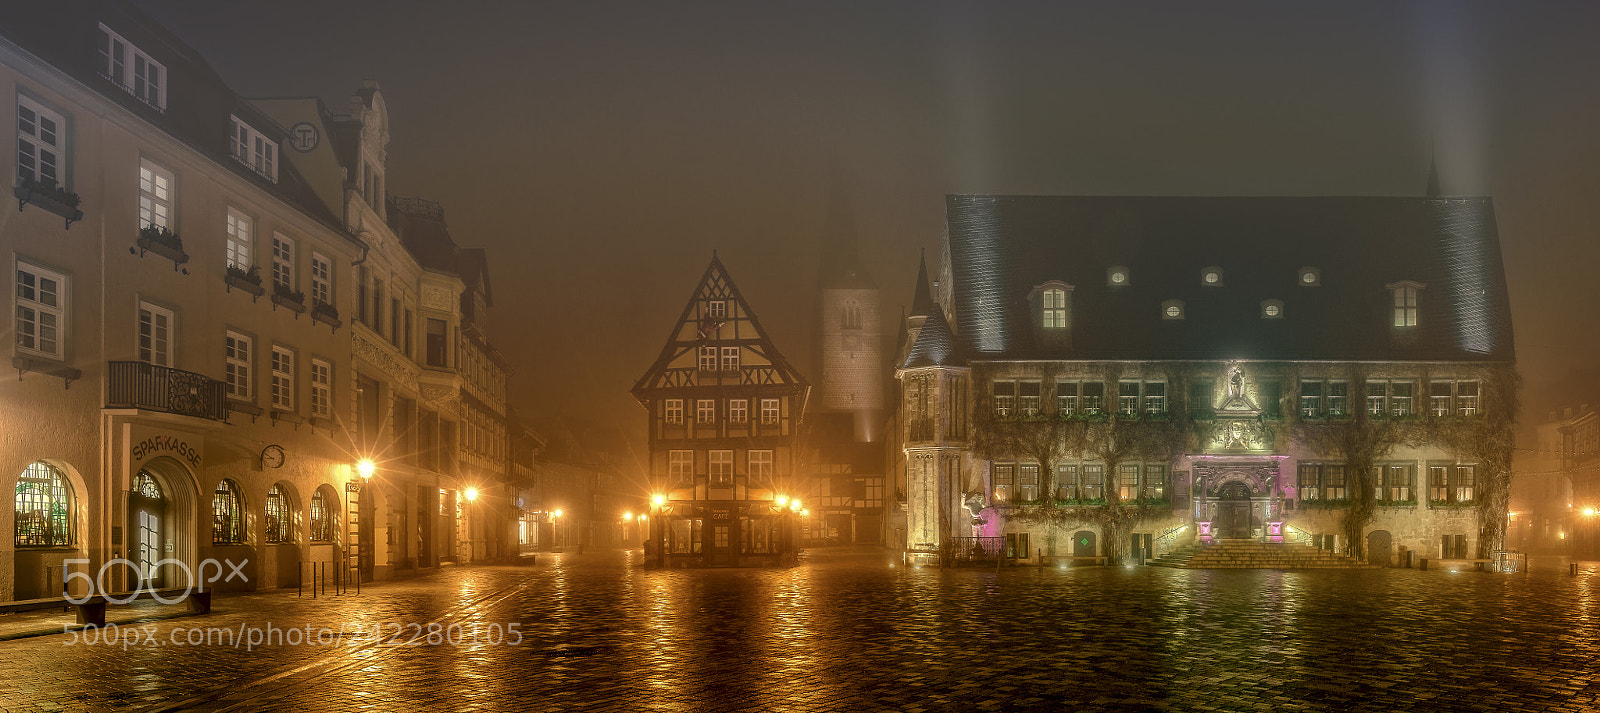 Nikon D810 sample photo. Foggy evening in town photography